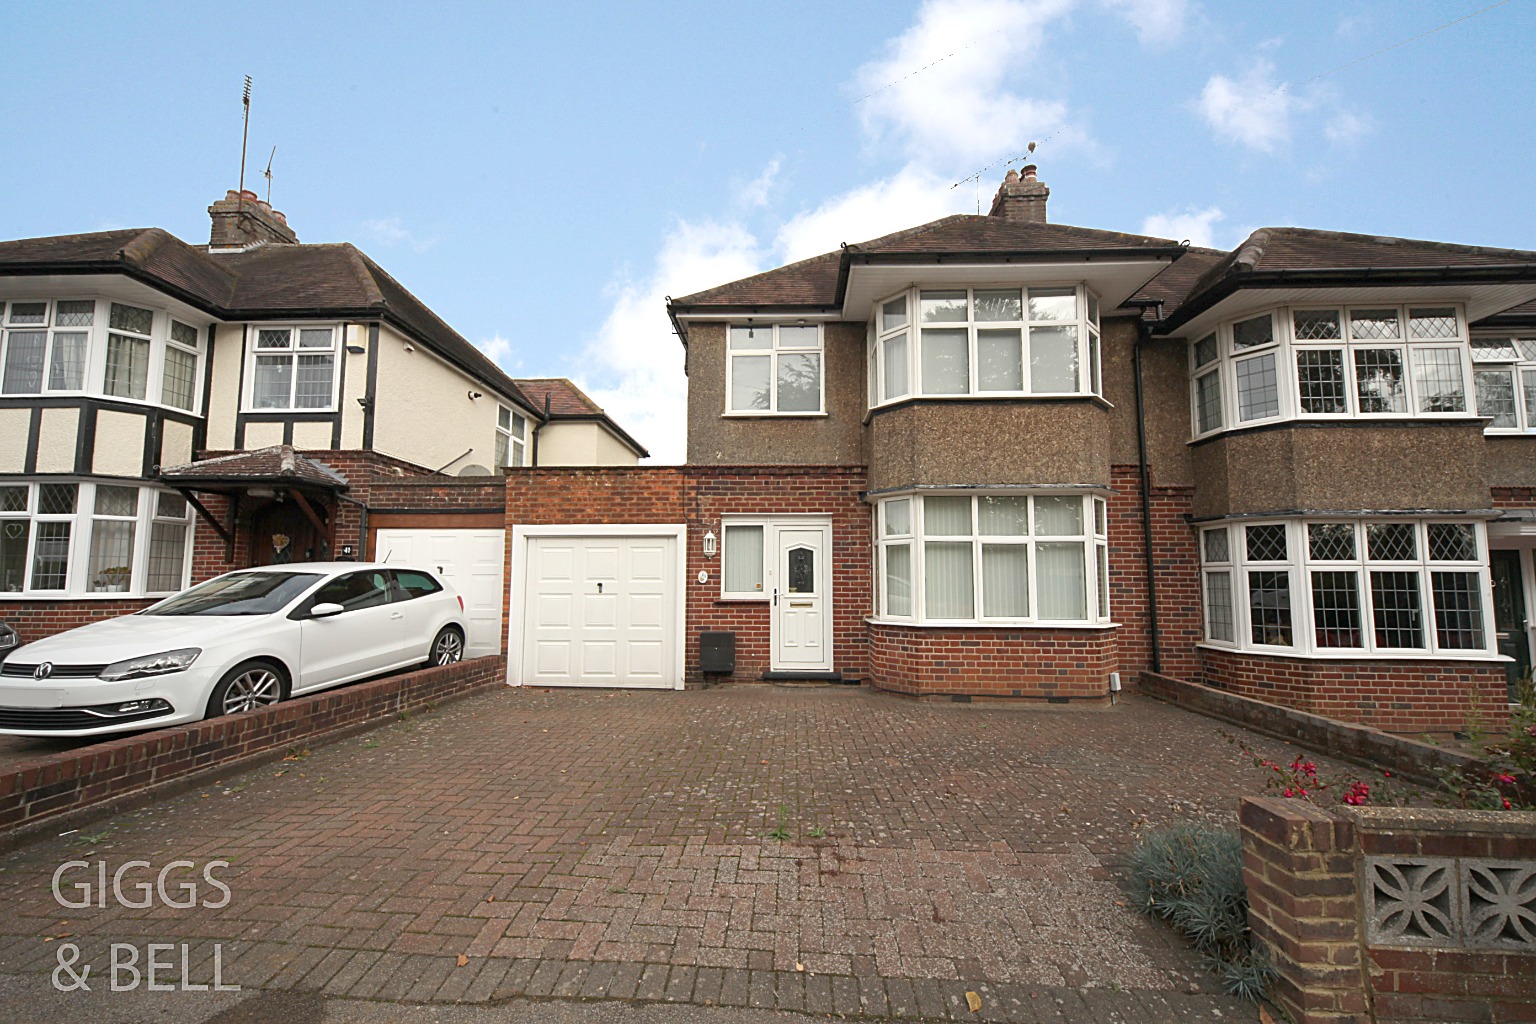 3 bed semi-detached house for sale in West Hill Road, Luton, LU1 